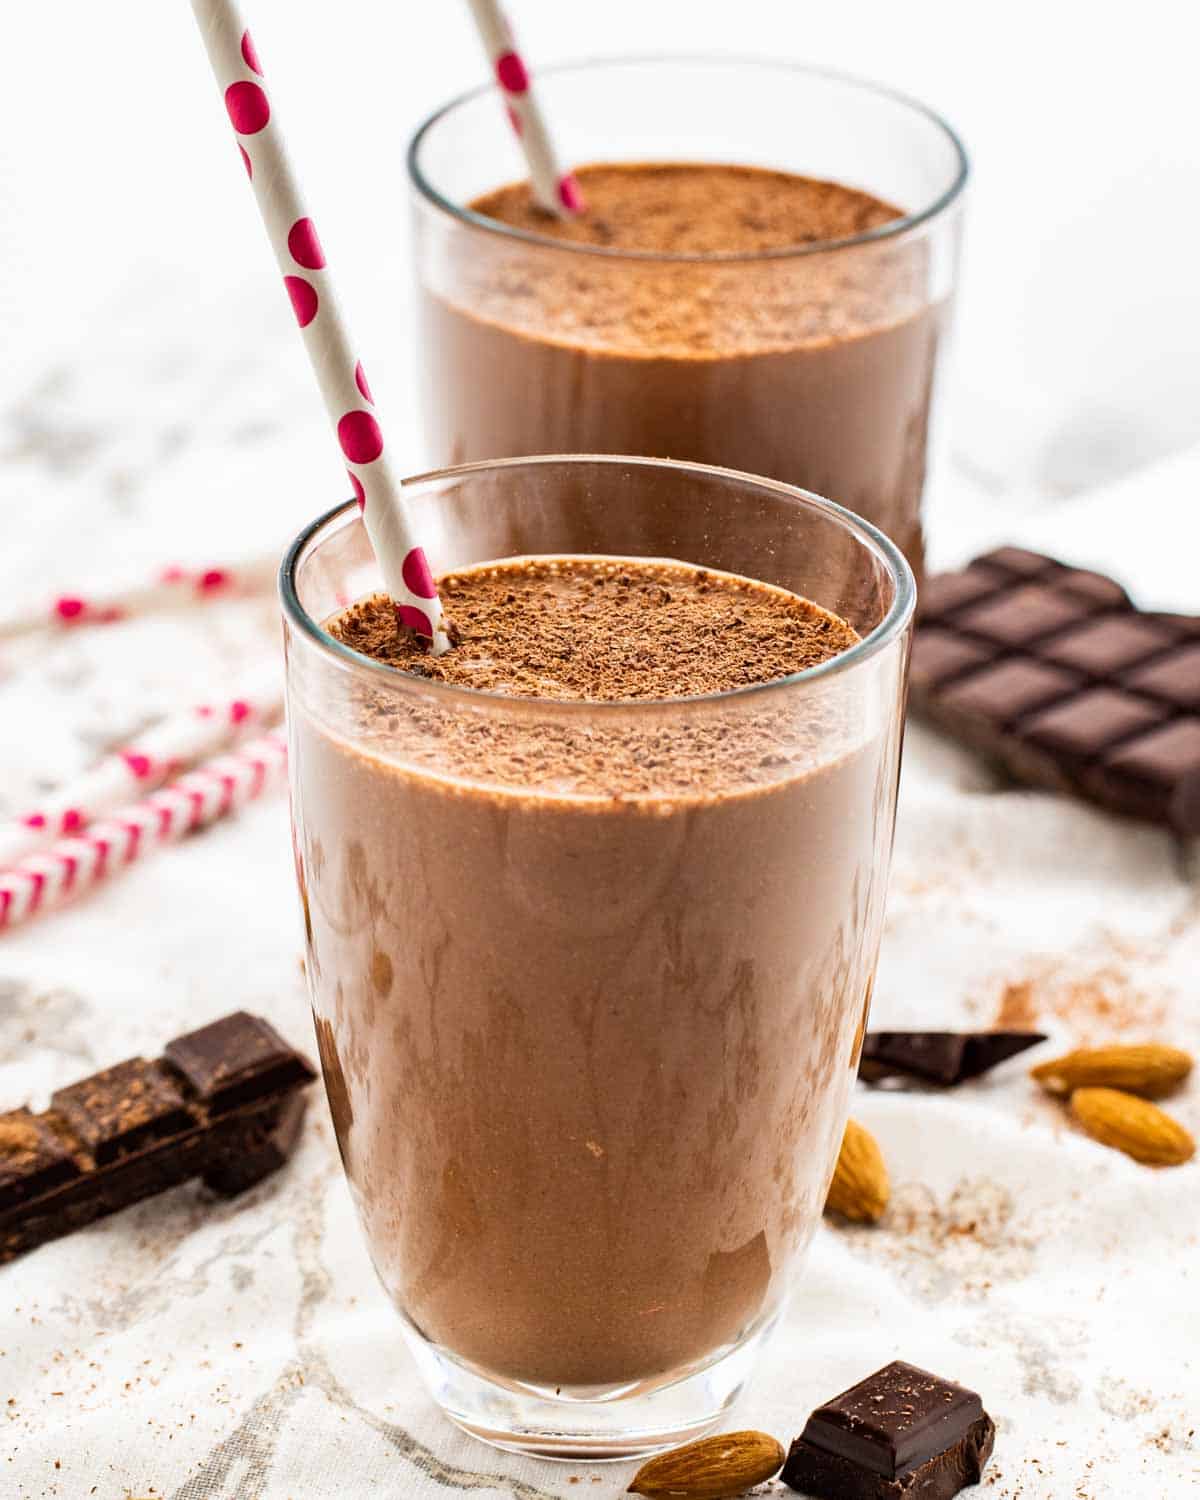 How To Make A Chocolate Smoothie? 